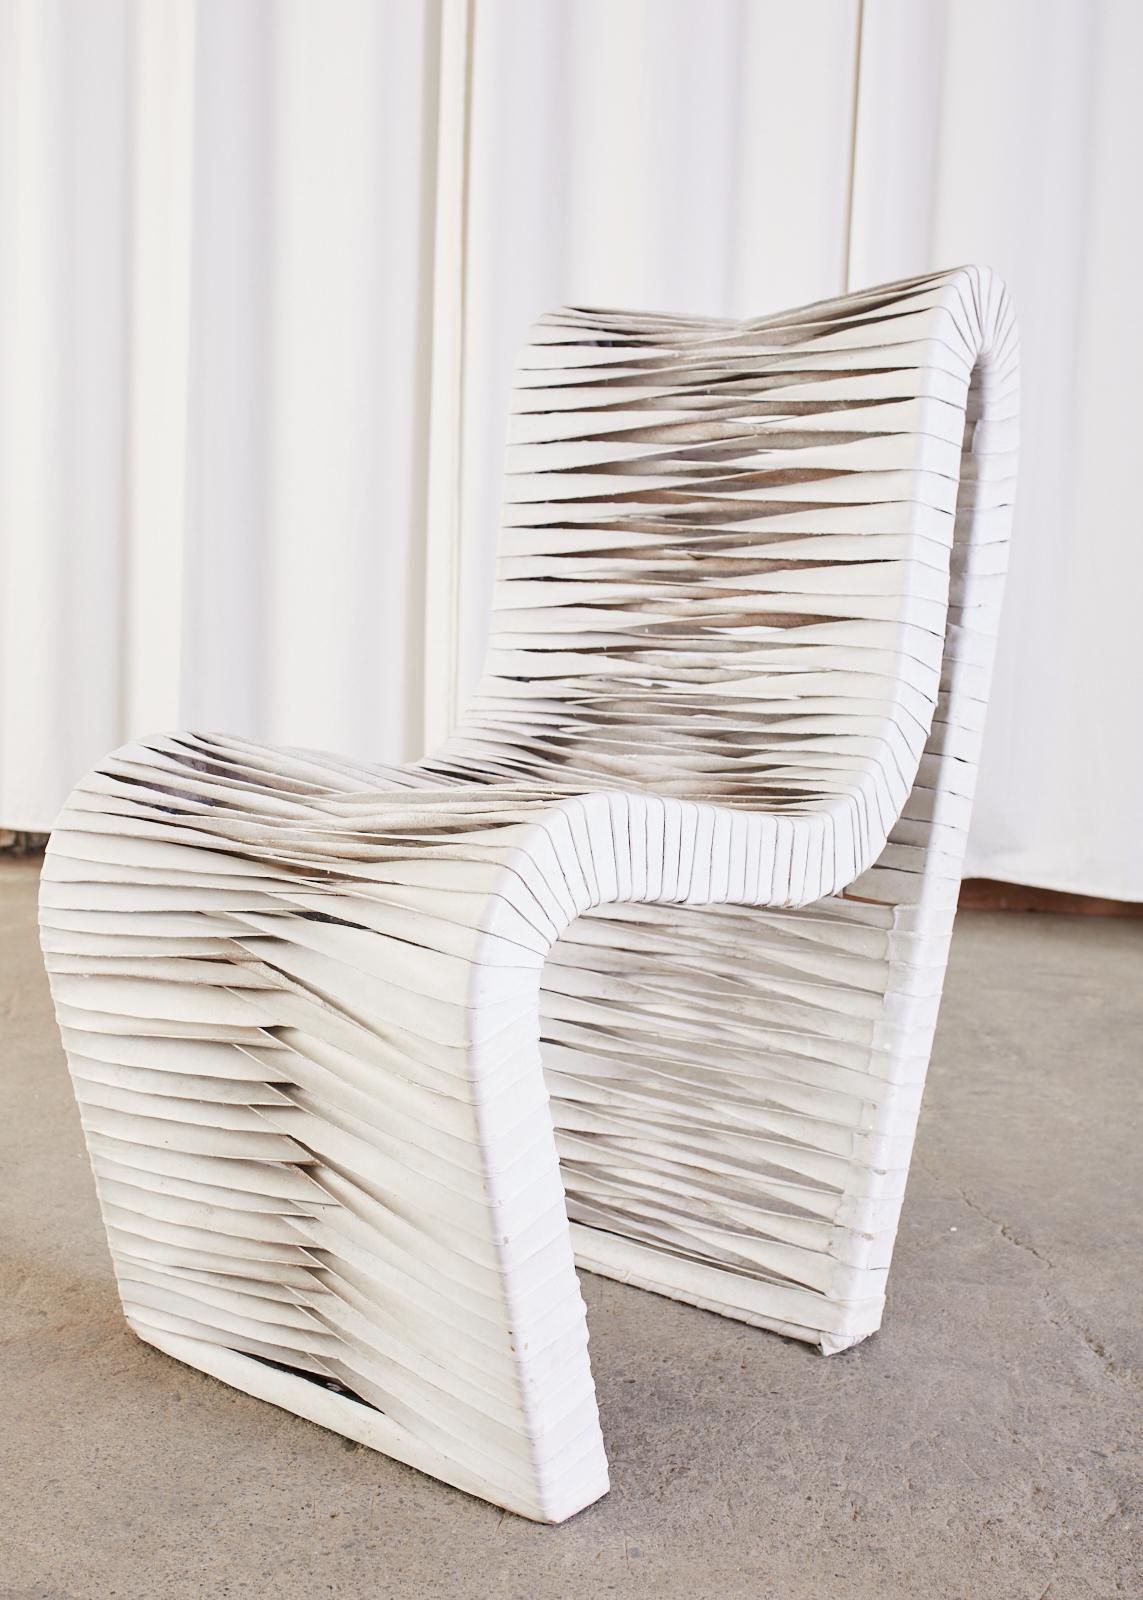 Aesthetic set of four sculptural lounge chairs featuring leather strap supports. The post modern chairs have a unique one piece steel frame that contours your body. Woven leather straps that are dyed white cover the frame with a decorative twist